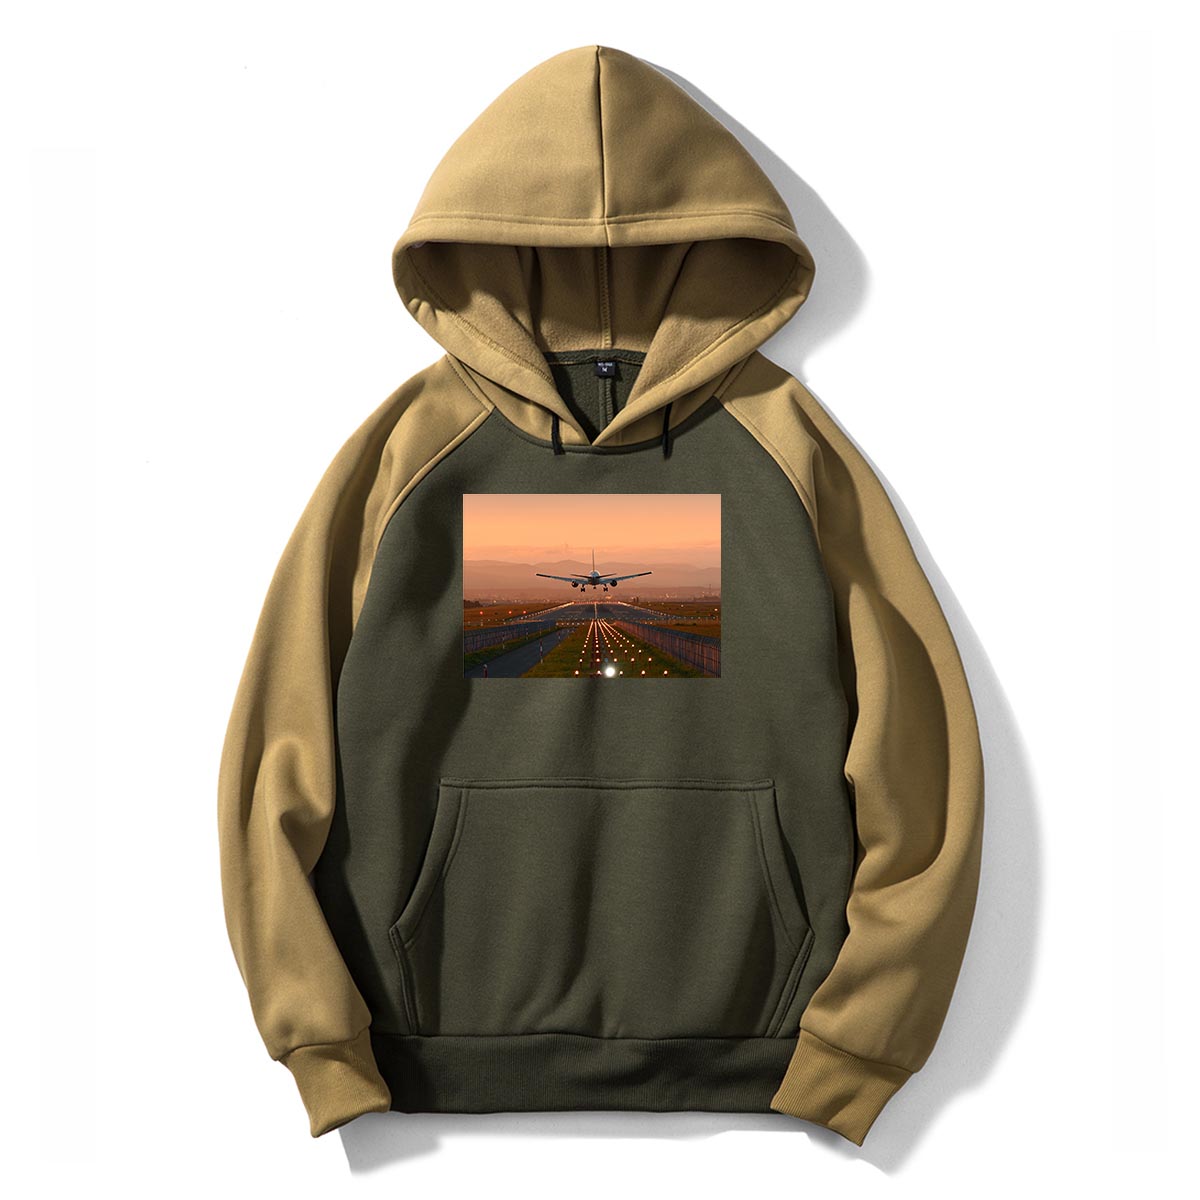 Super Cool Landing During Sunset Designed Colourful Hoodies